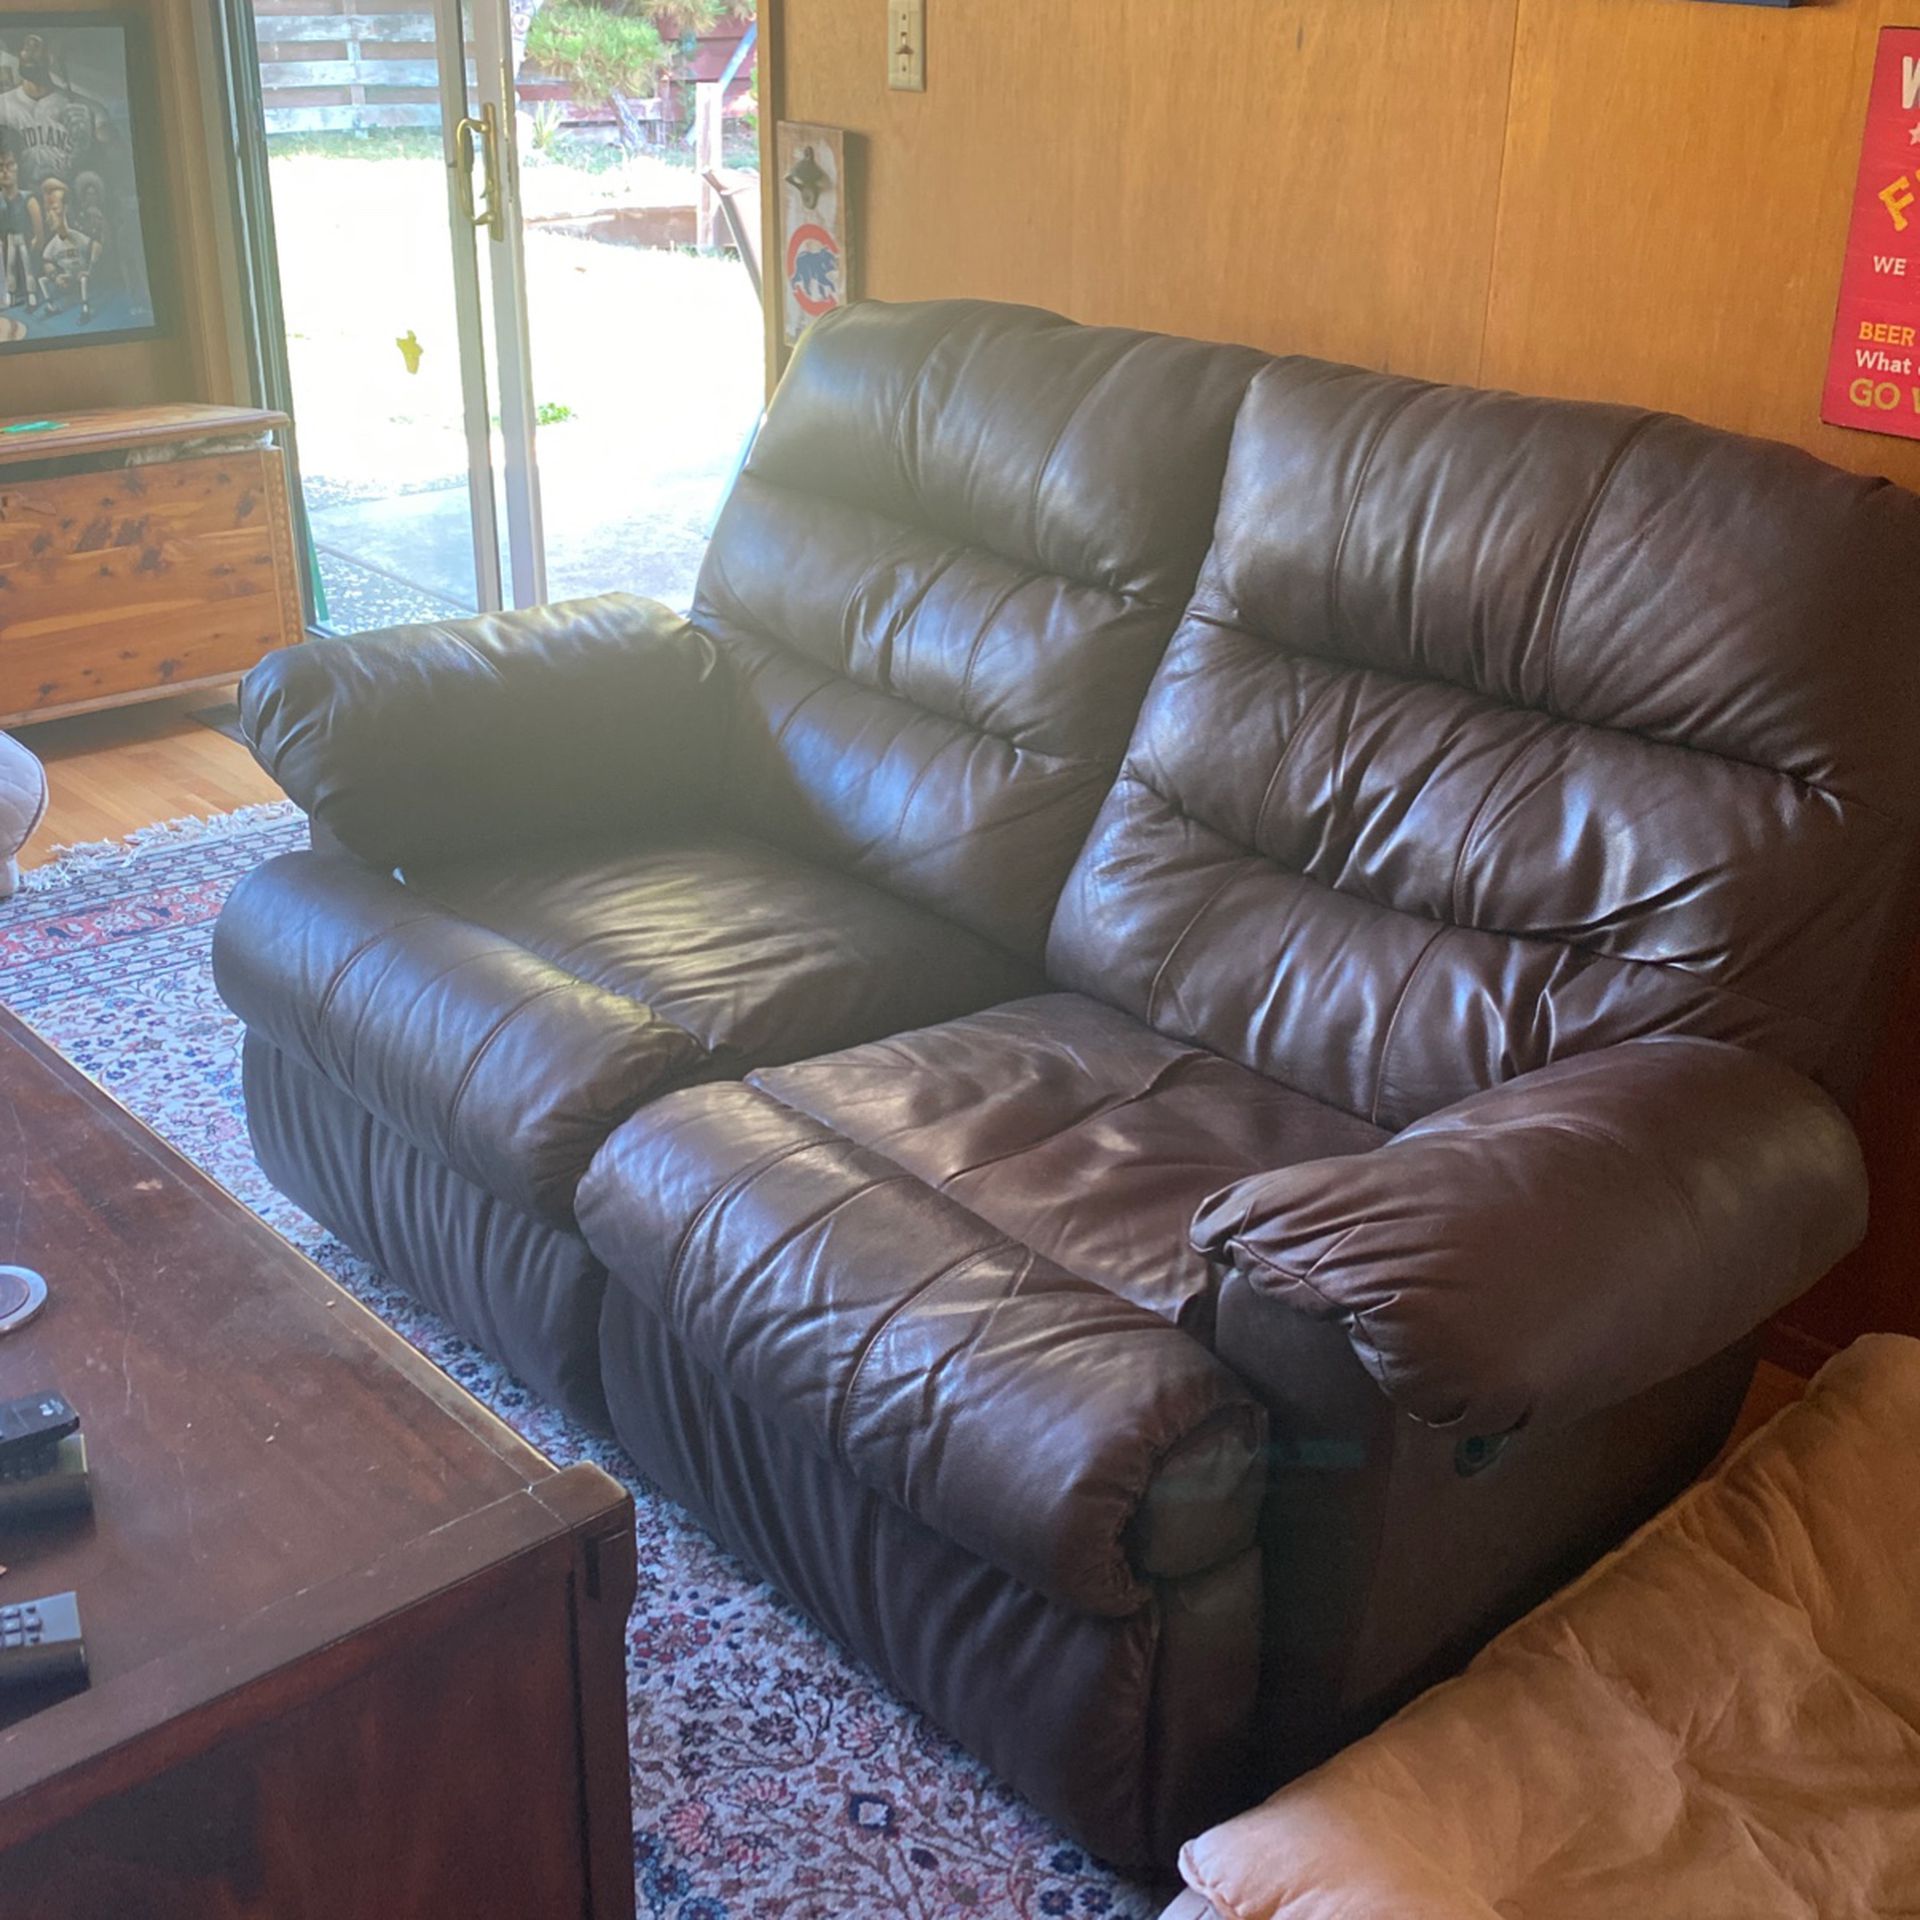 Matching Loveseats With Recliners - Sold Together